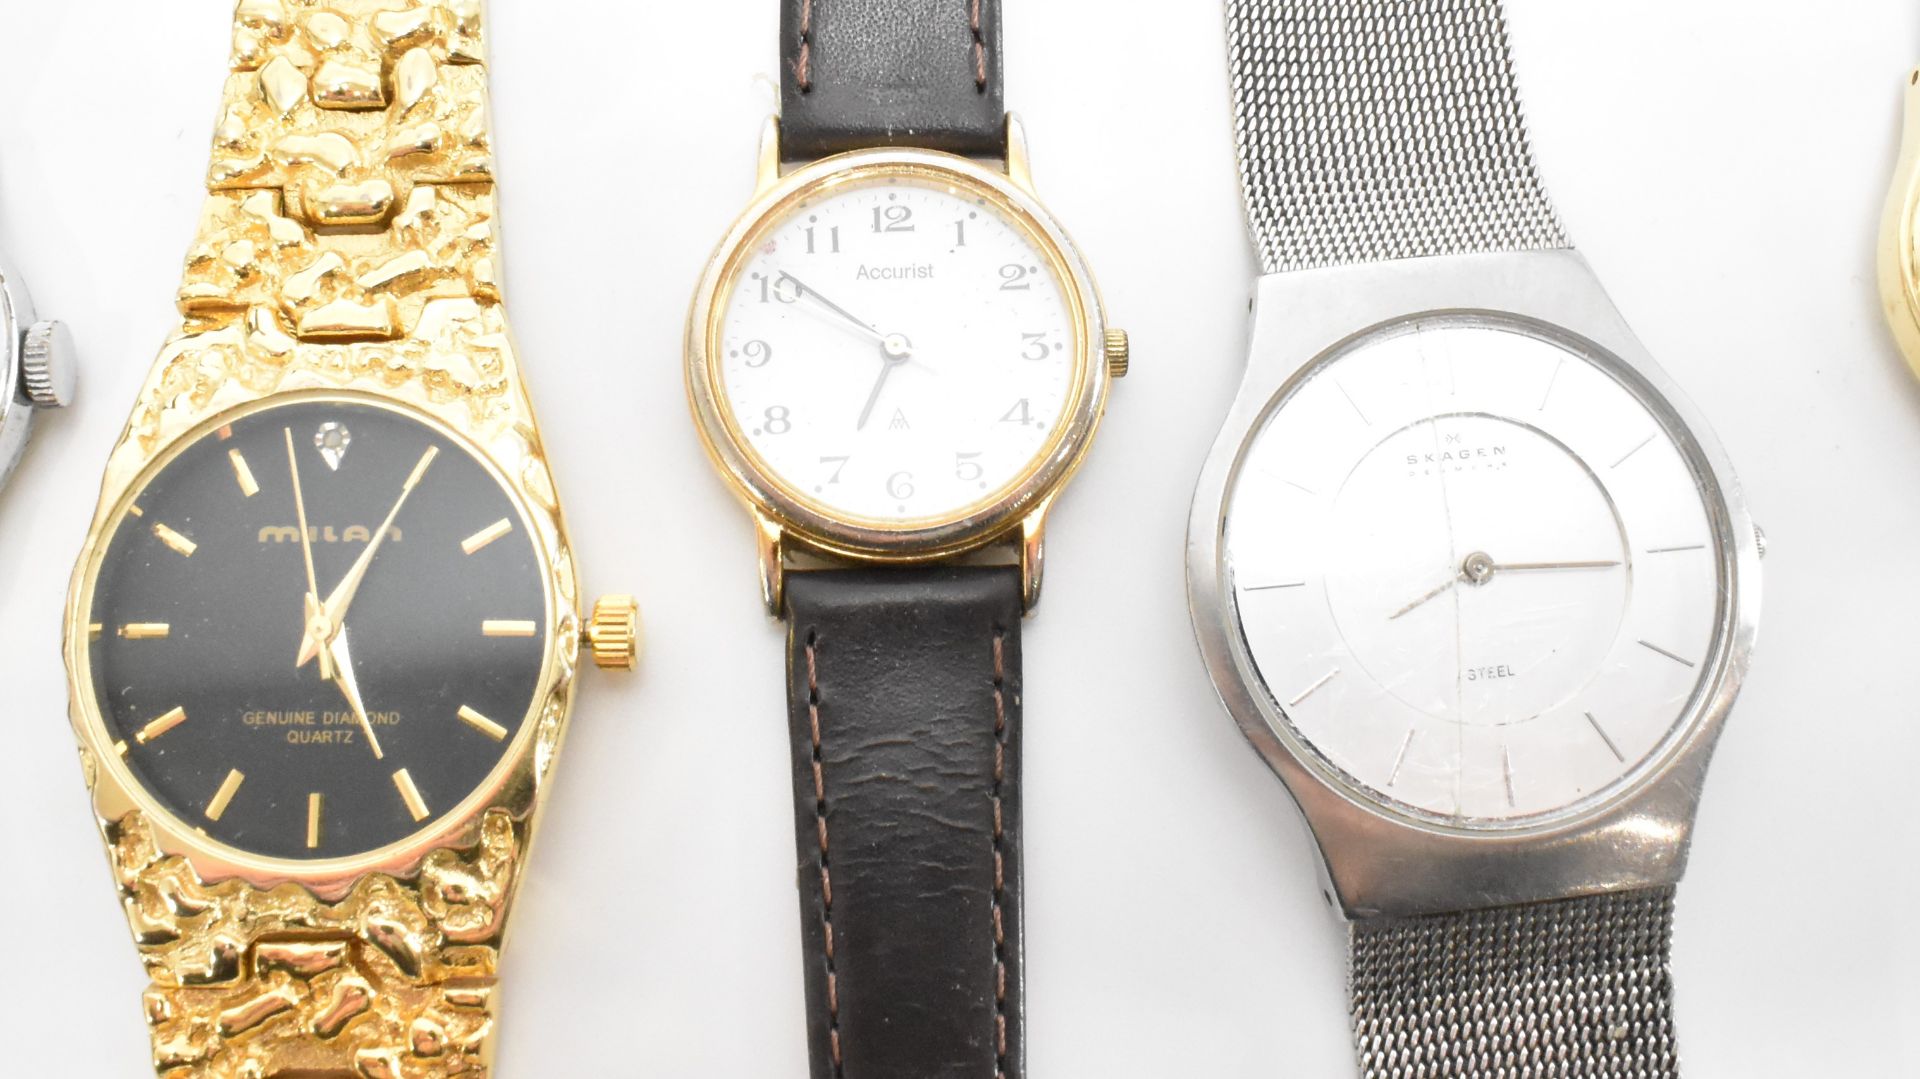 ASSORTMENT OF VARIOUS WRIST WATCHES - Image 8 of 9